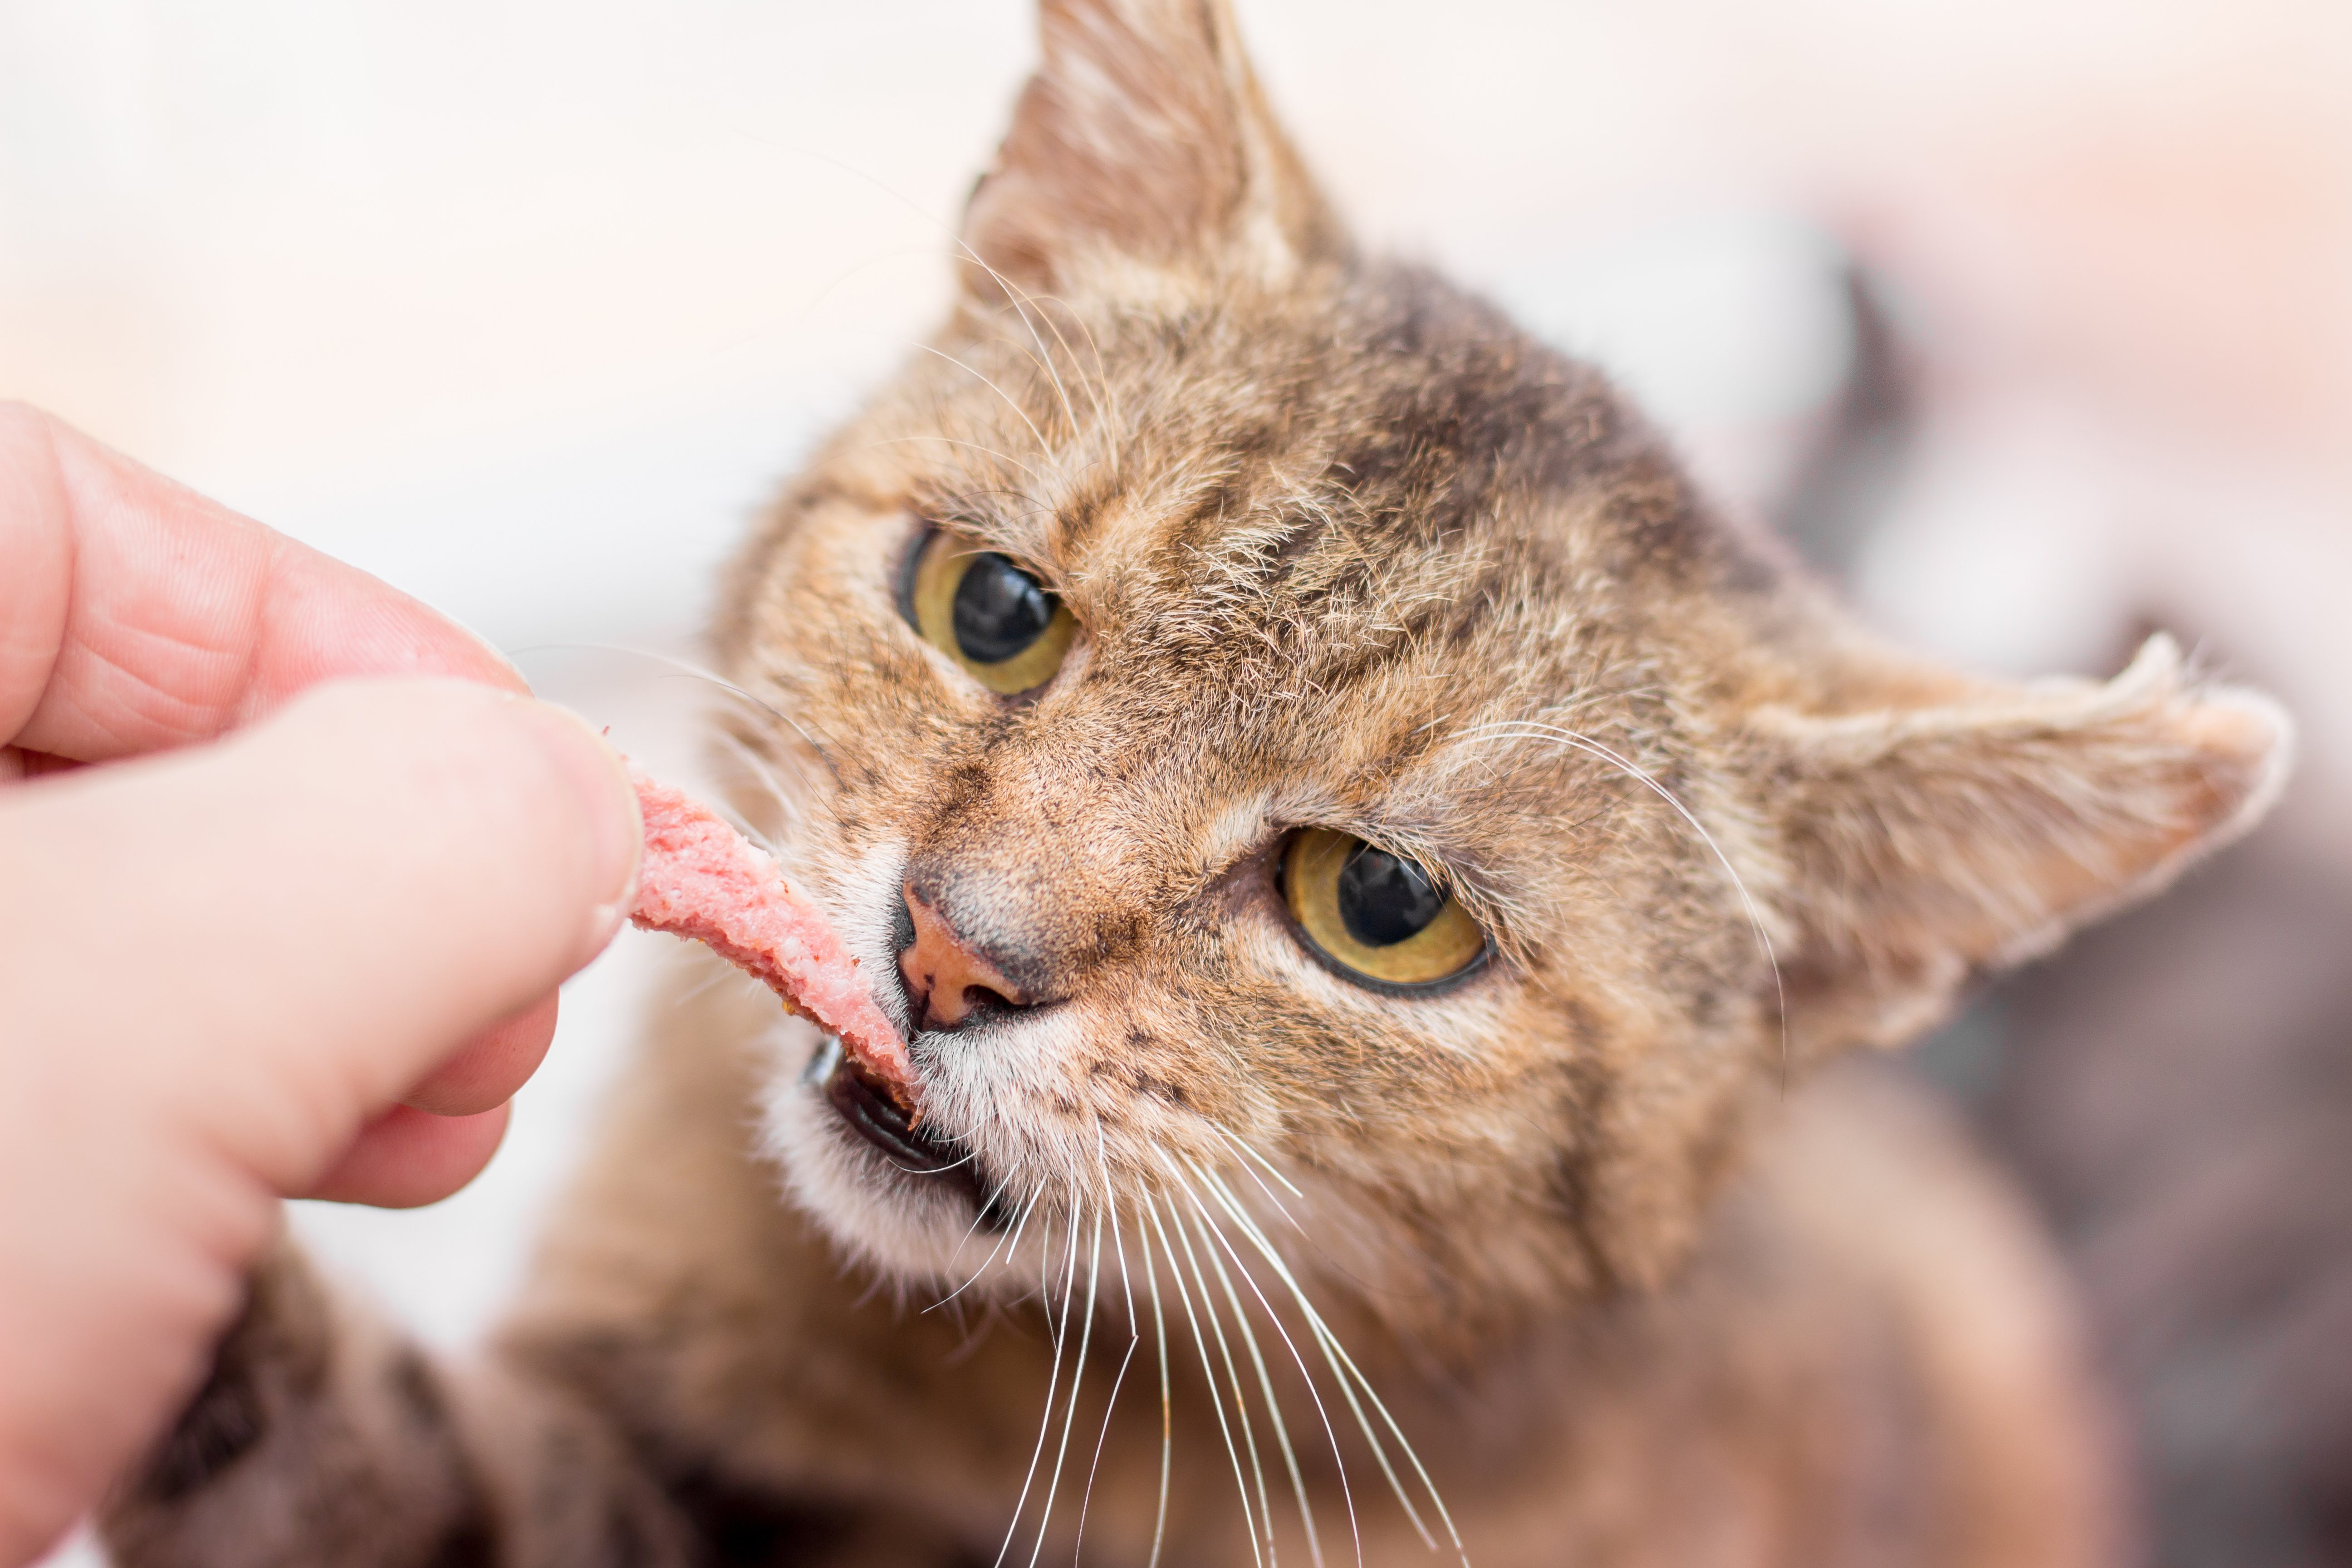 There are special foods for older cats that you should be aware of.